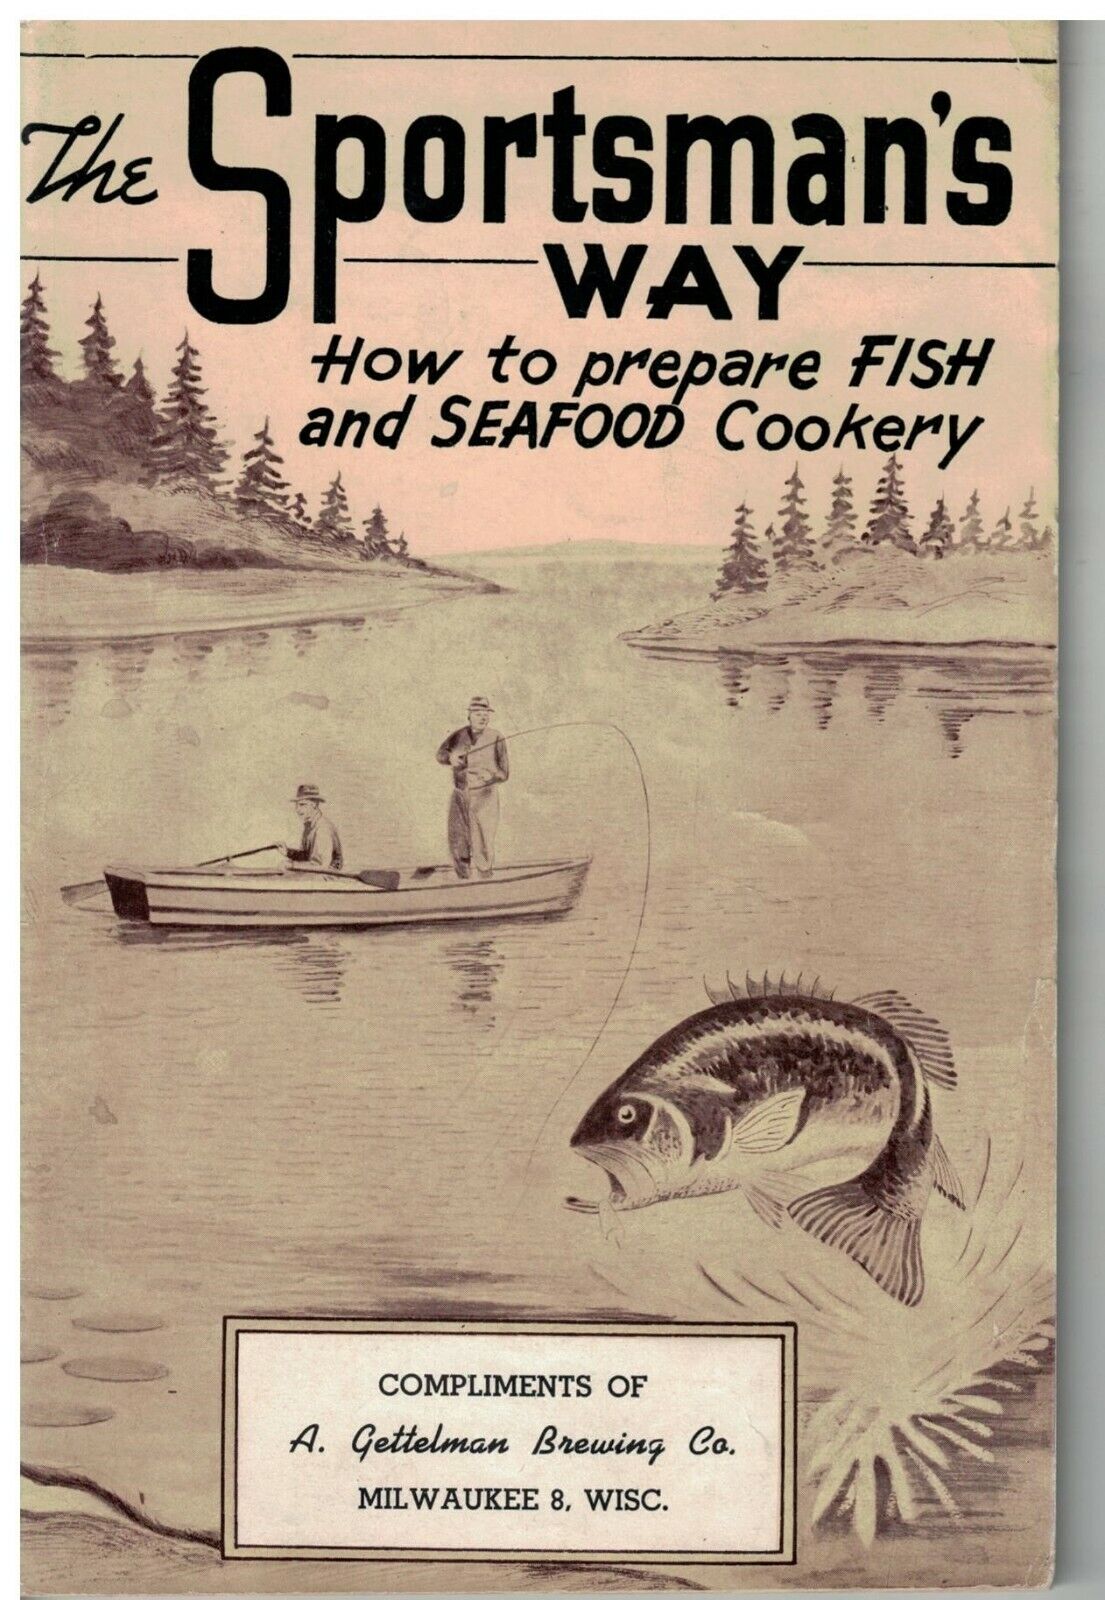 1940s-50s Gettelman\'s Brewing Co Fish & Seafood Cook Book